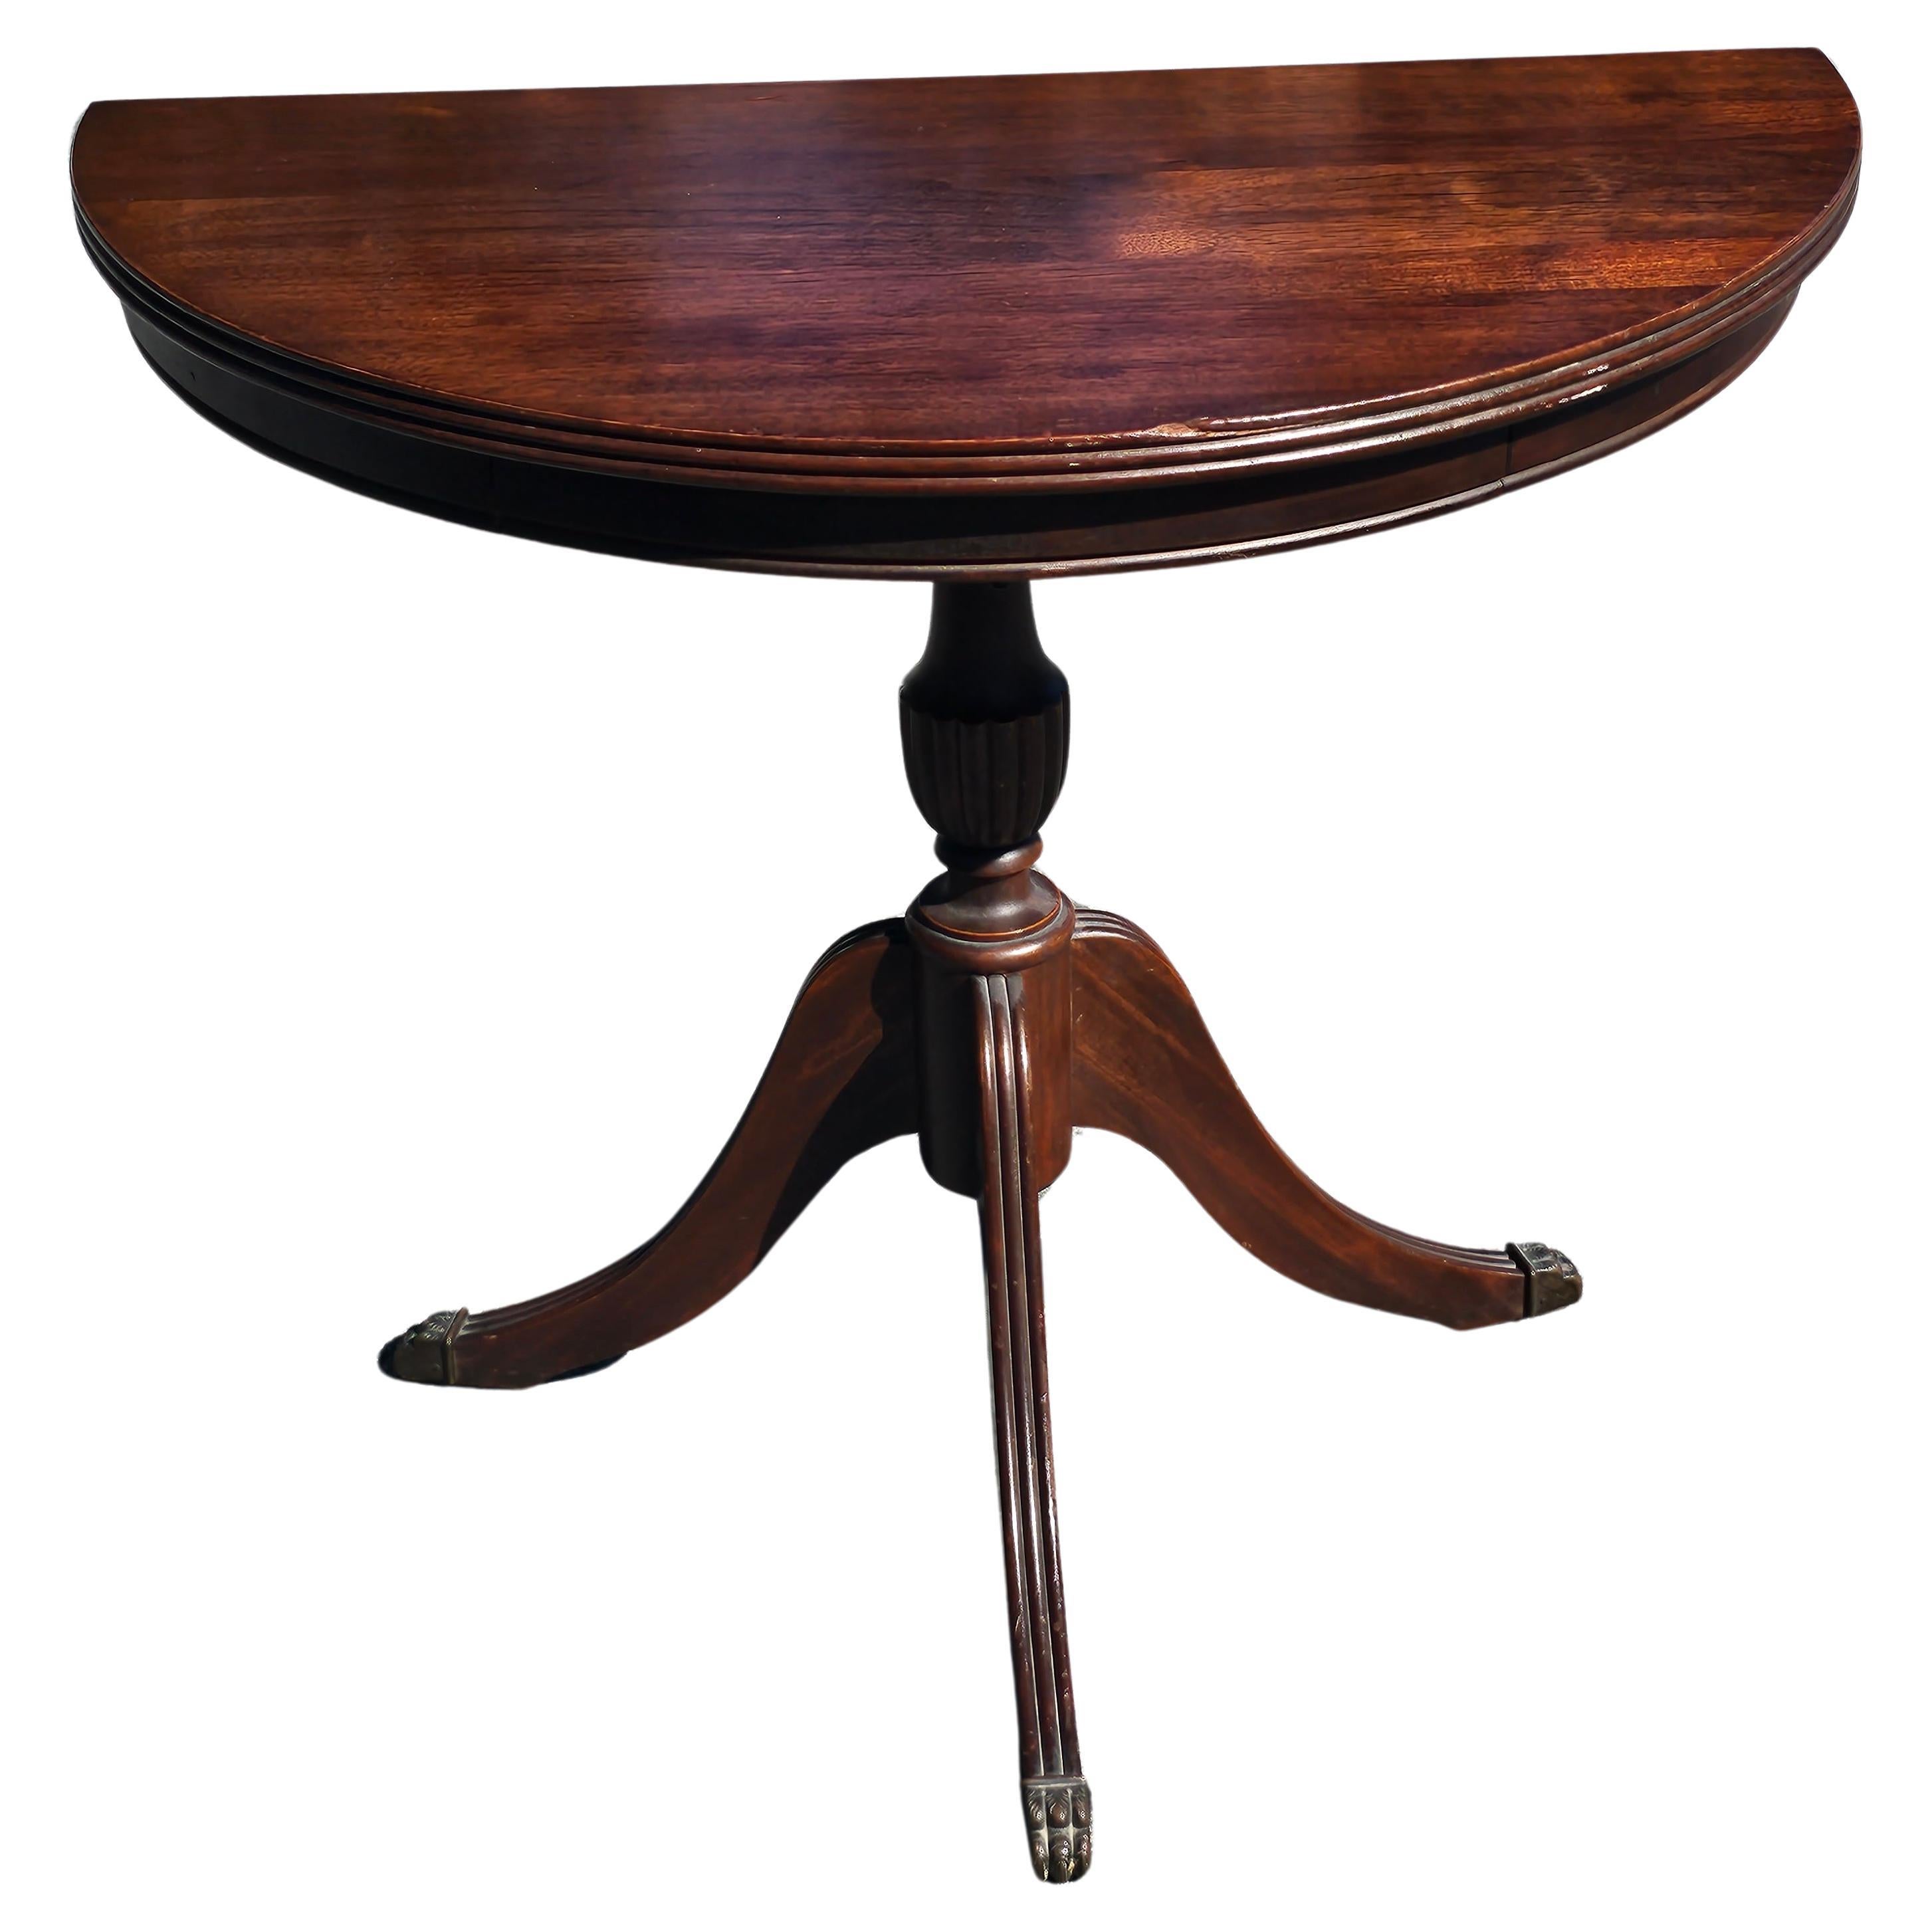 Early 20th Century Federal Mahogany Pedestal Trifid Demilune Table with brass paw feet. Measures 25